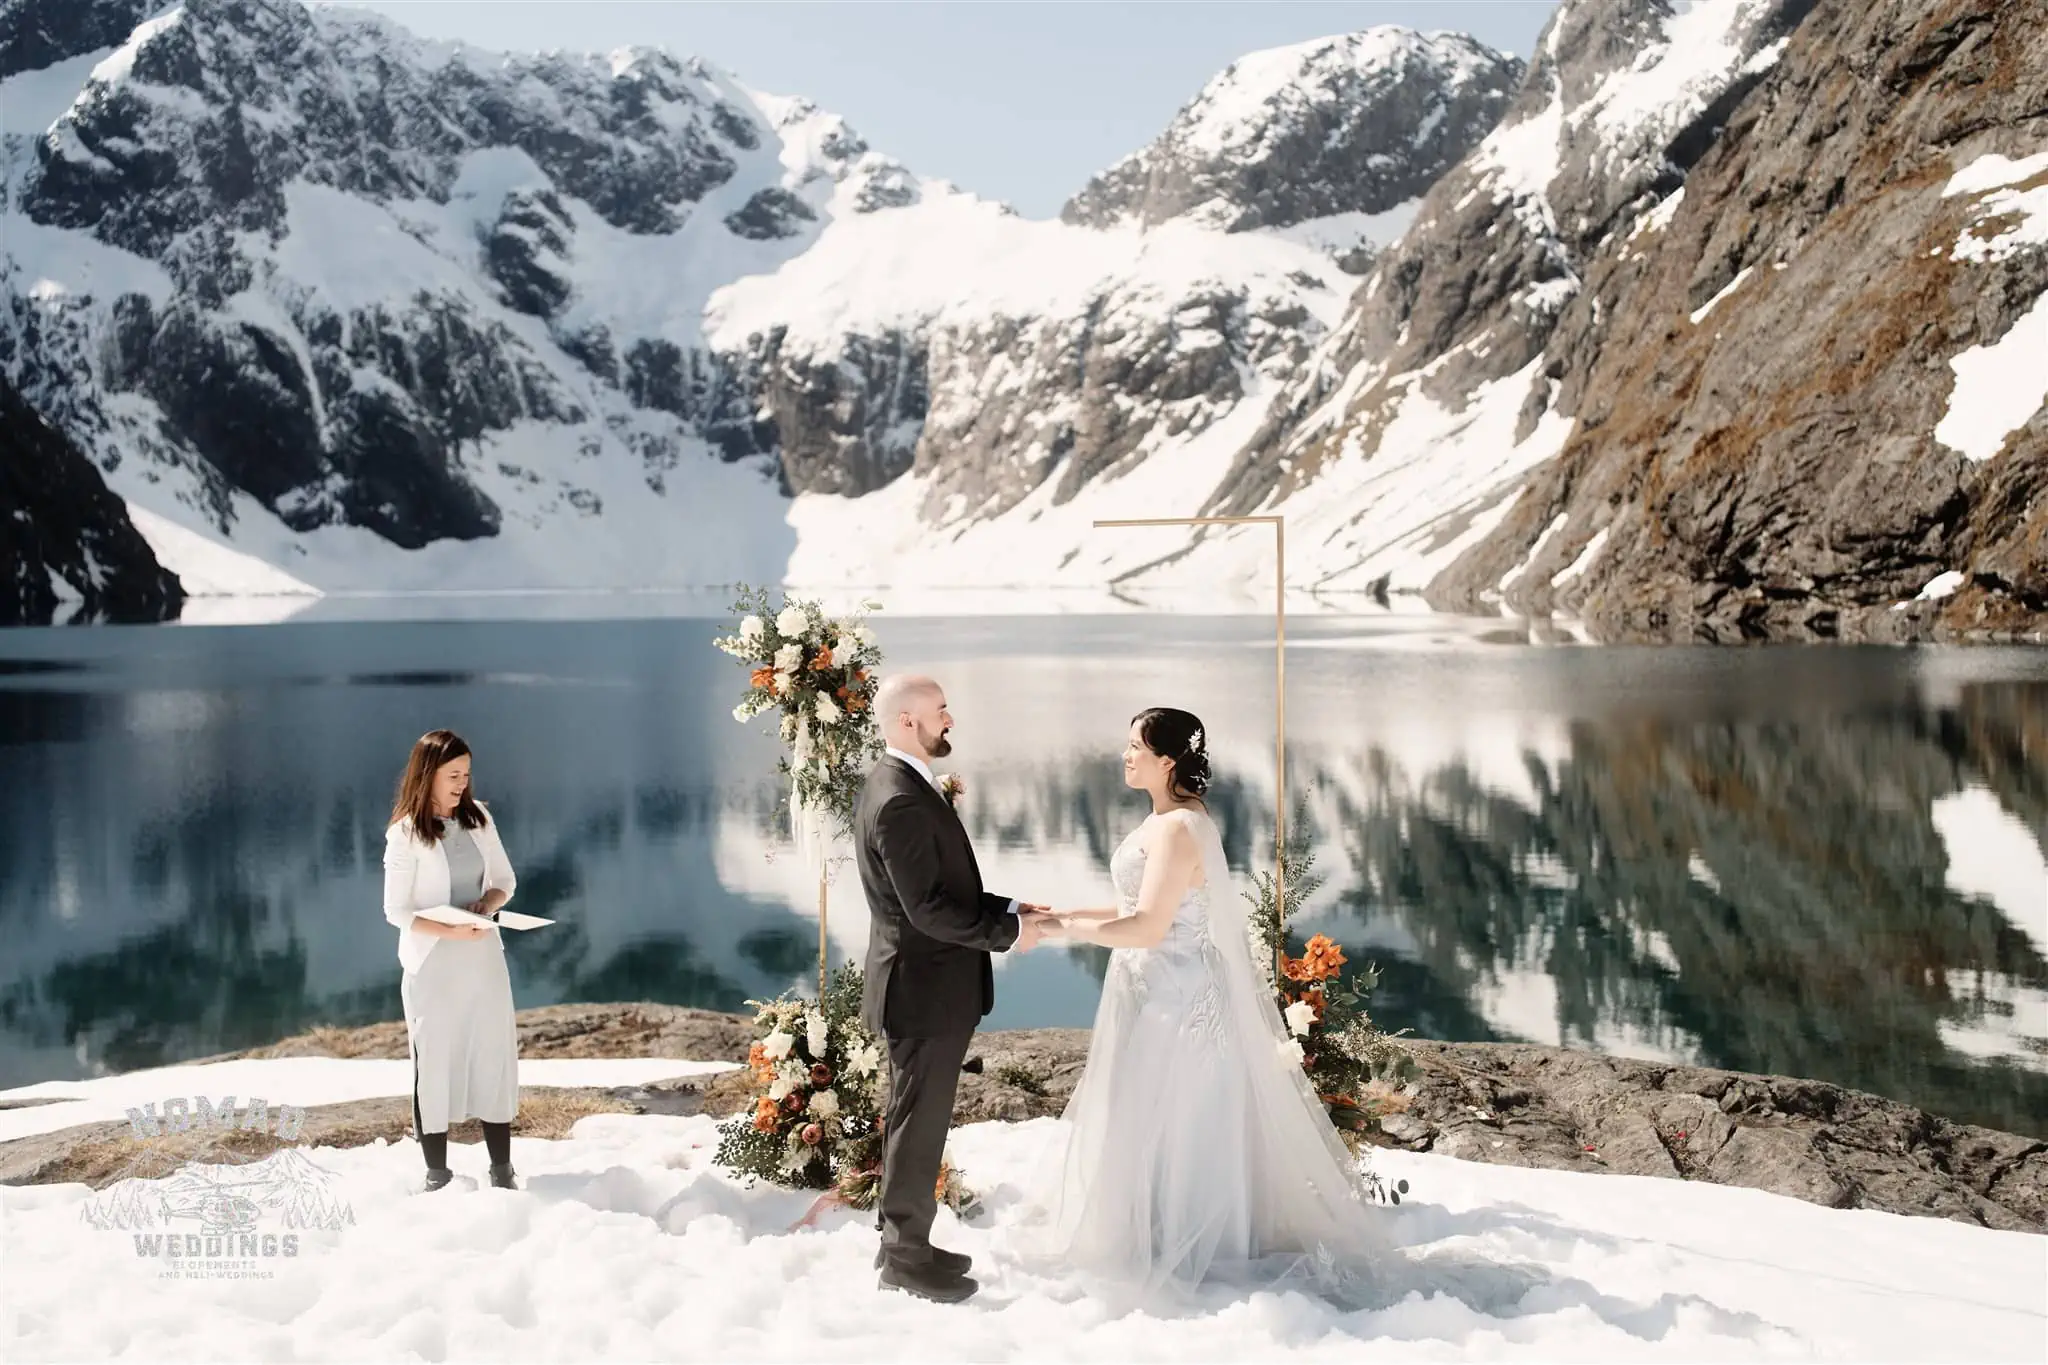 Zoe and Stuart's heli elopement wedding at Lake Erskine with mountains in the background.